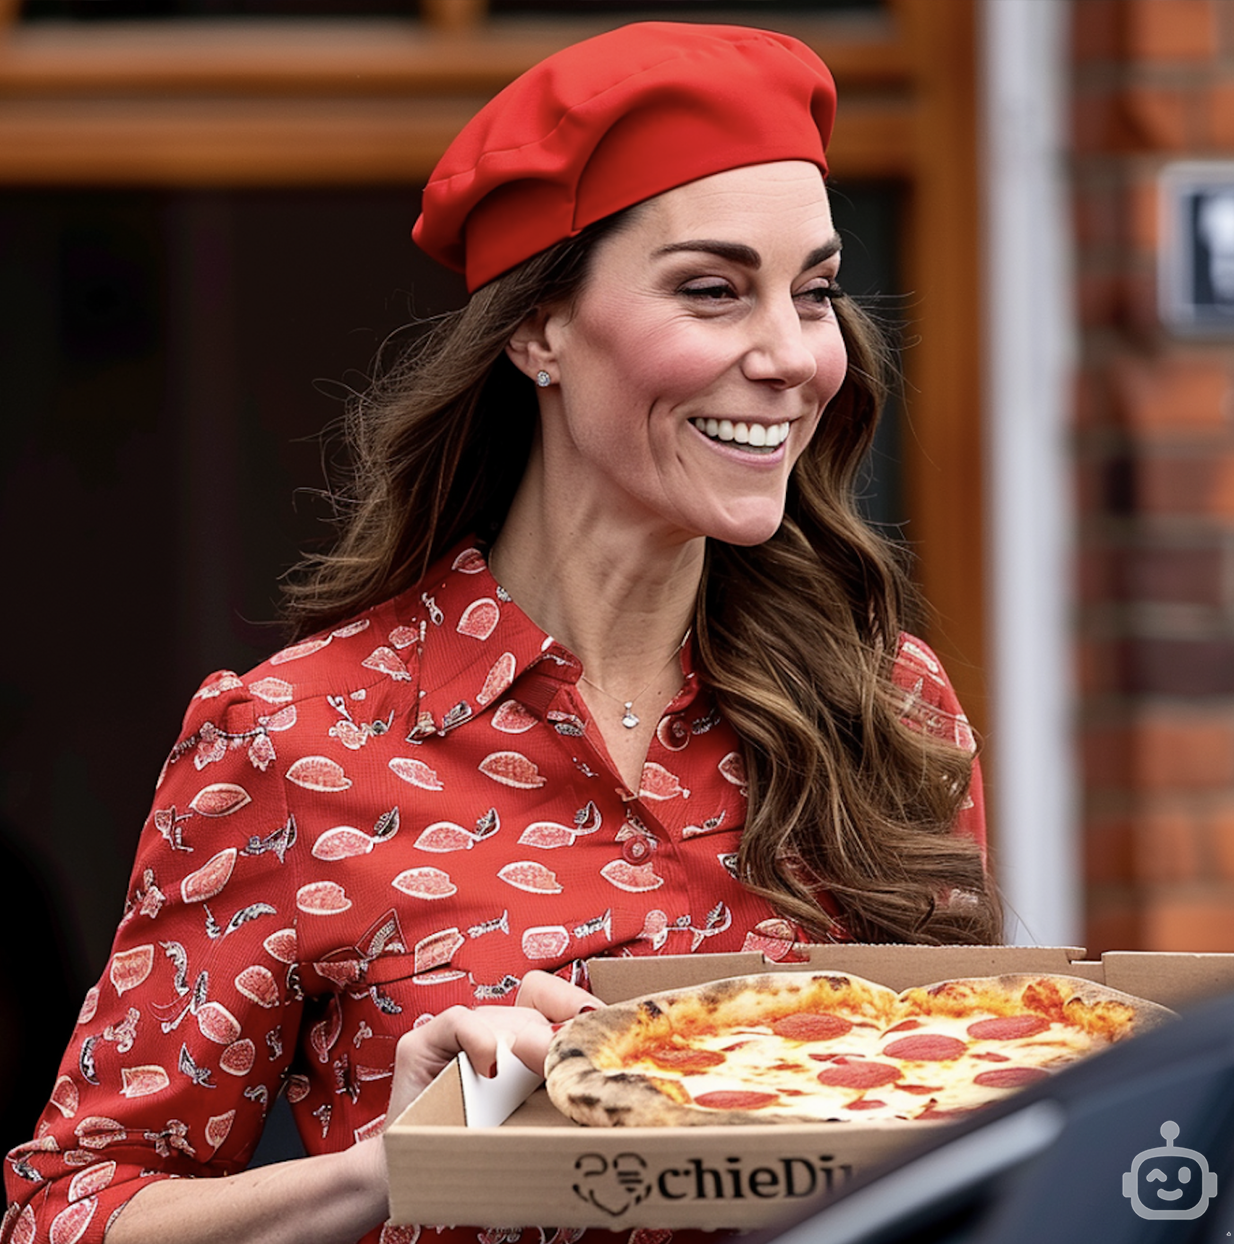 Woman in a red beret and patterned blouse smiles while holding a pizza box